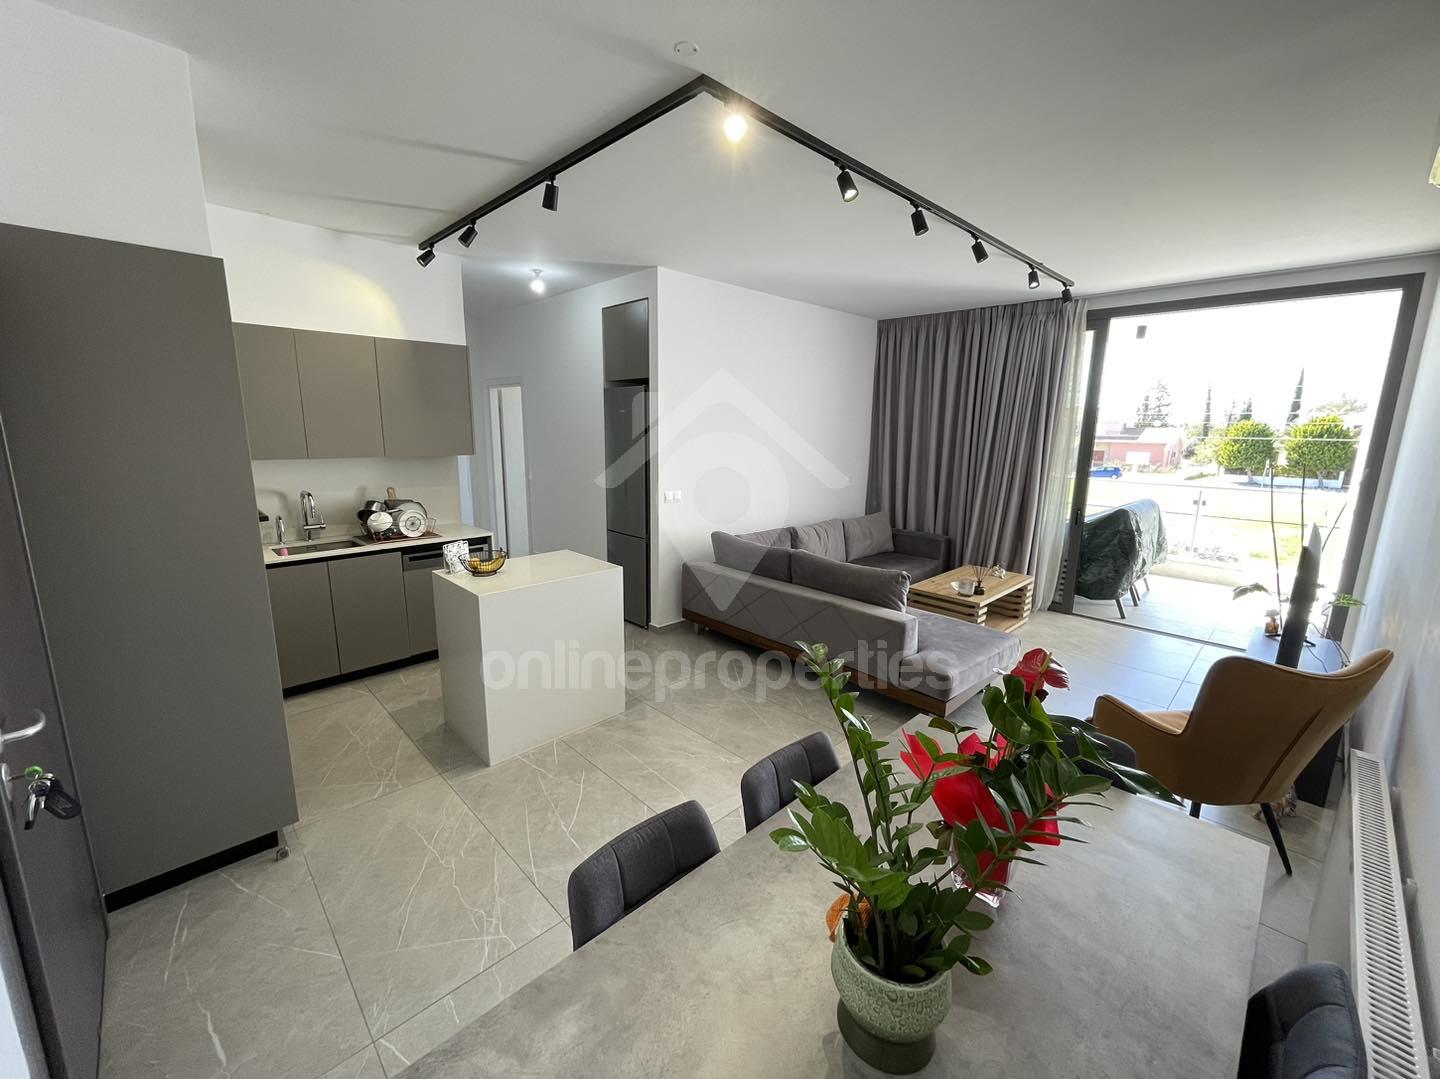 Modern 2-bedroom apartment with photovoltaic system